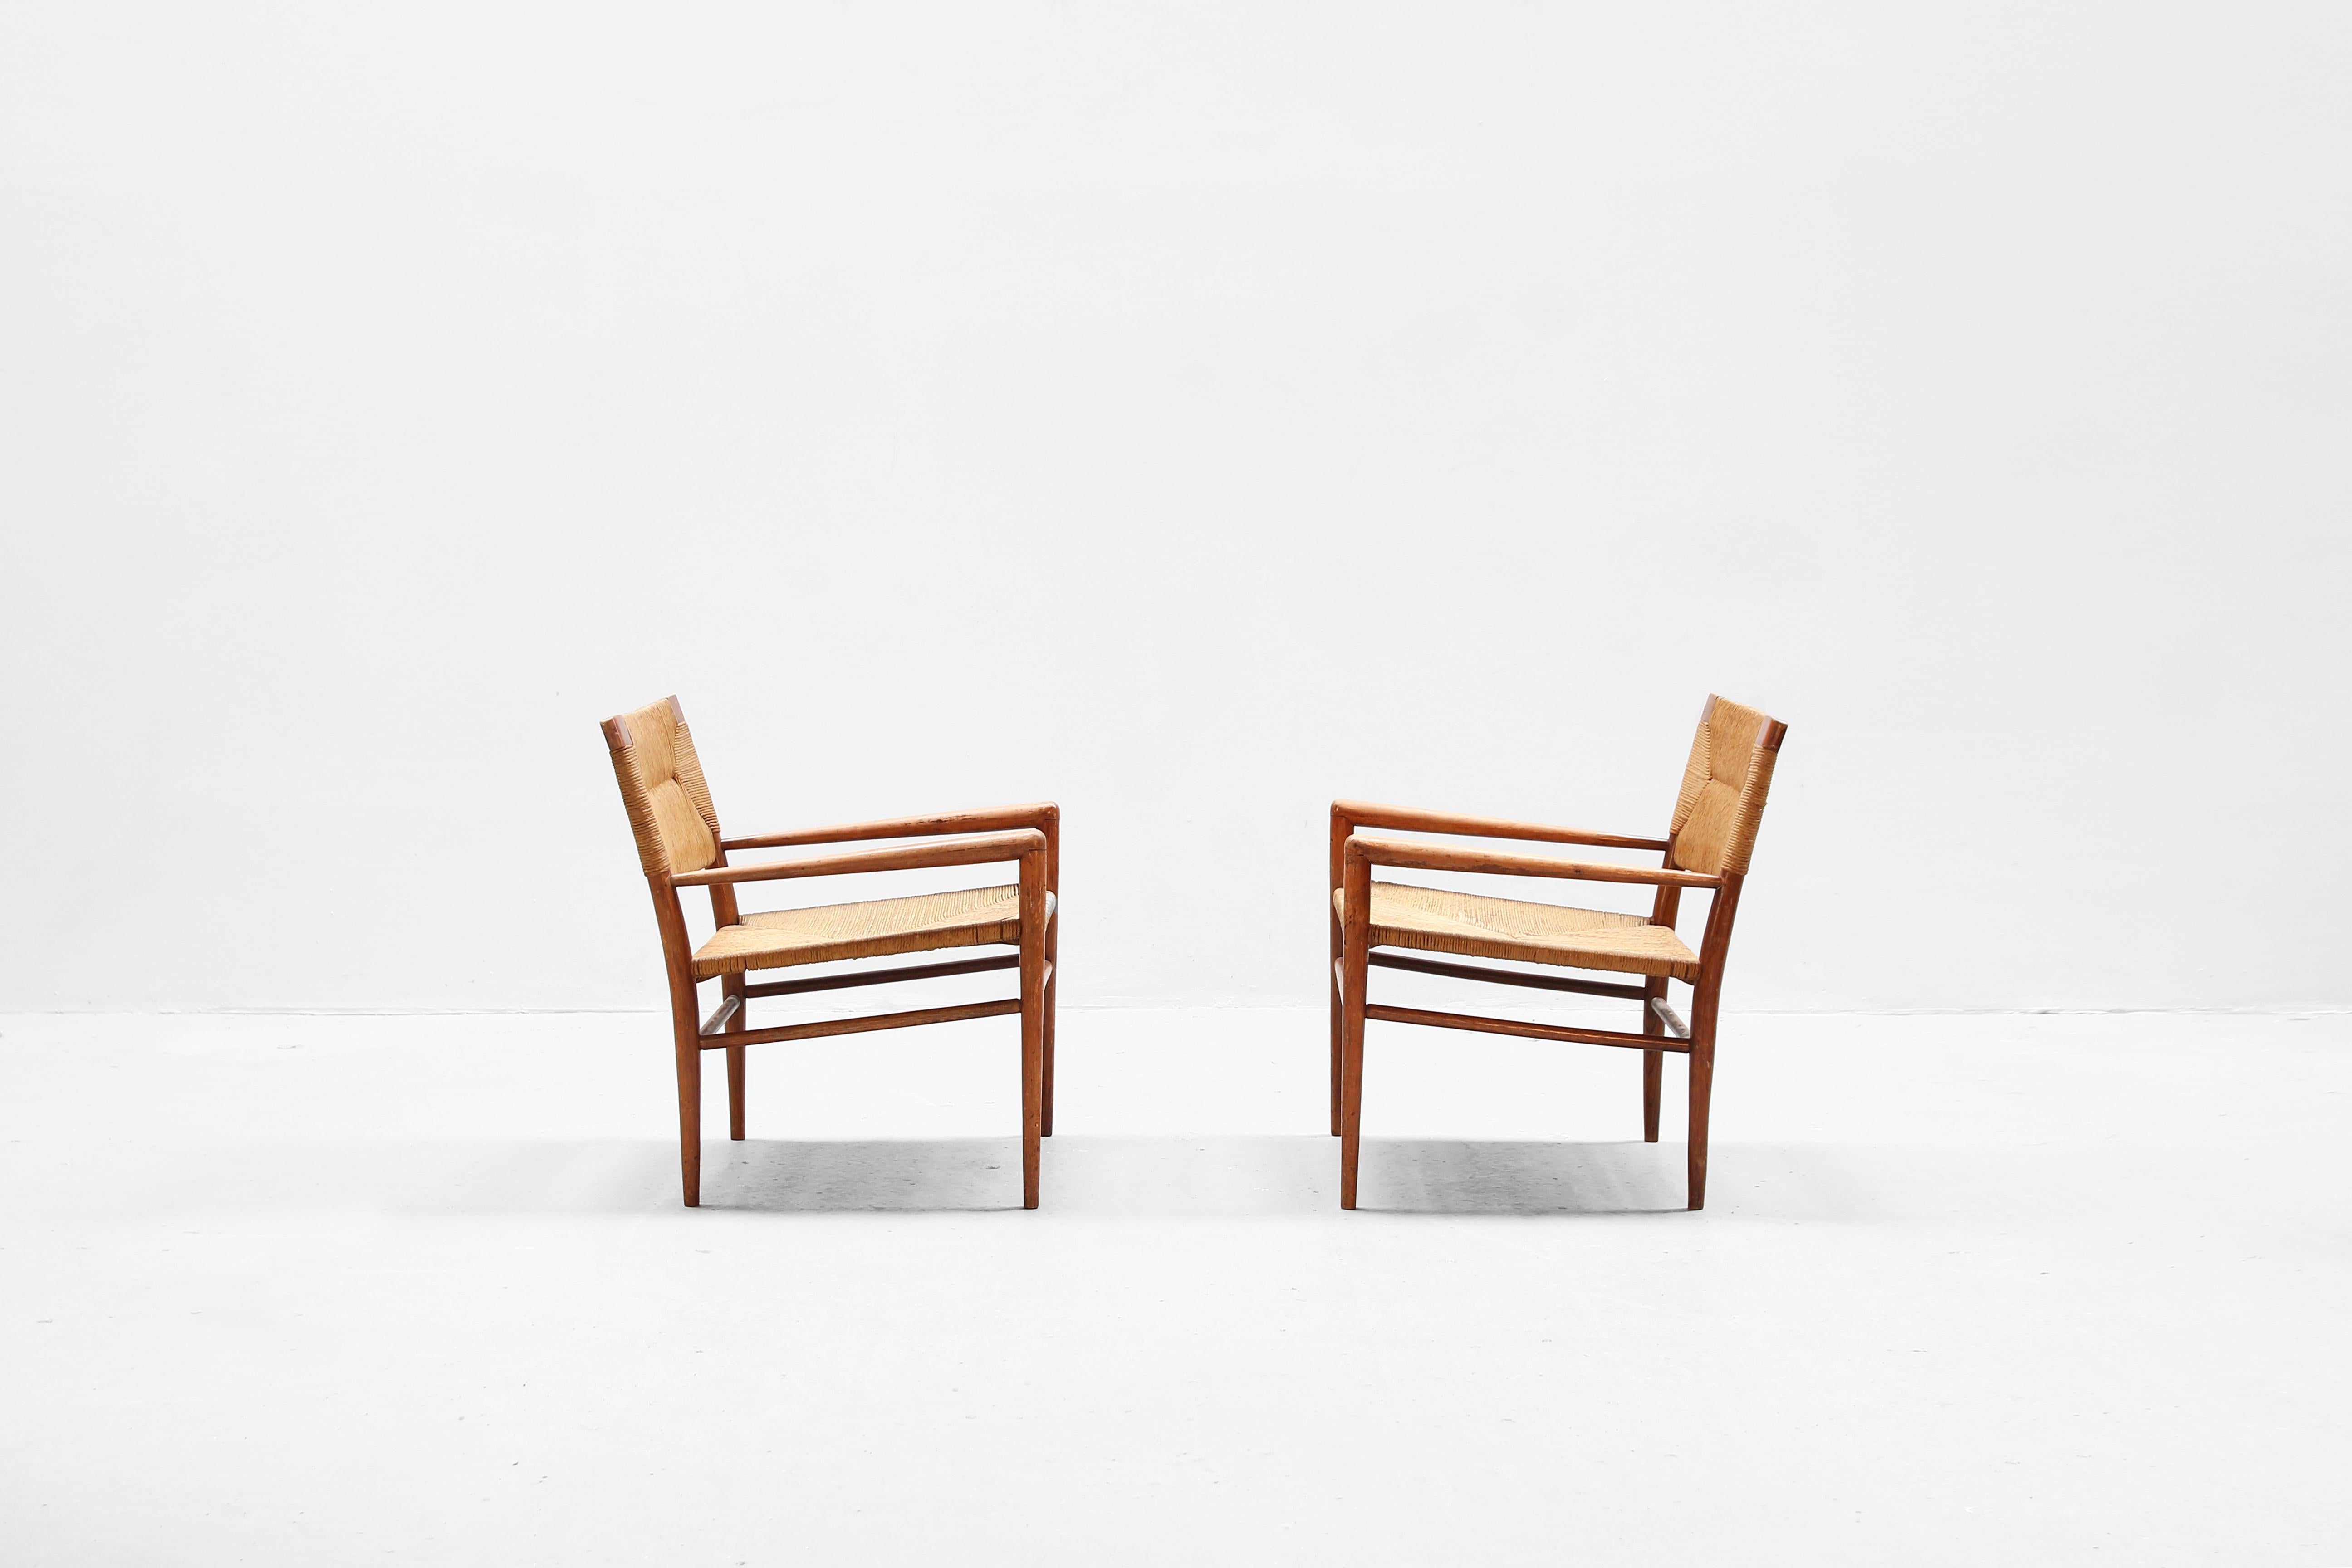 Mid-19th Century Pair of American Lounge Chairs by Mel Smilow for Smilow-Thielle 1950ies